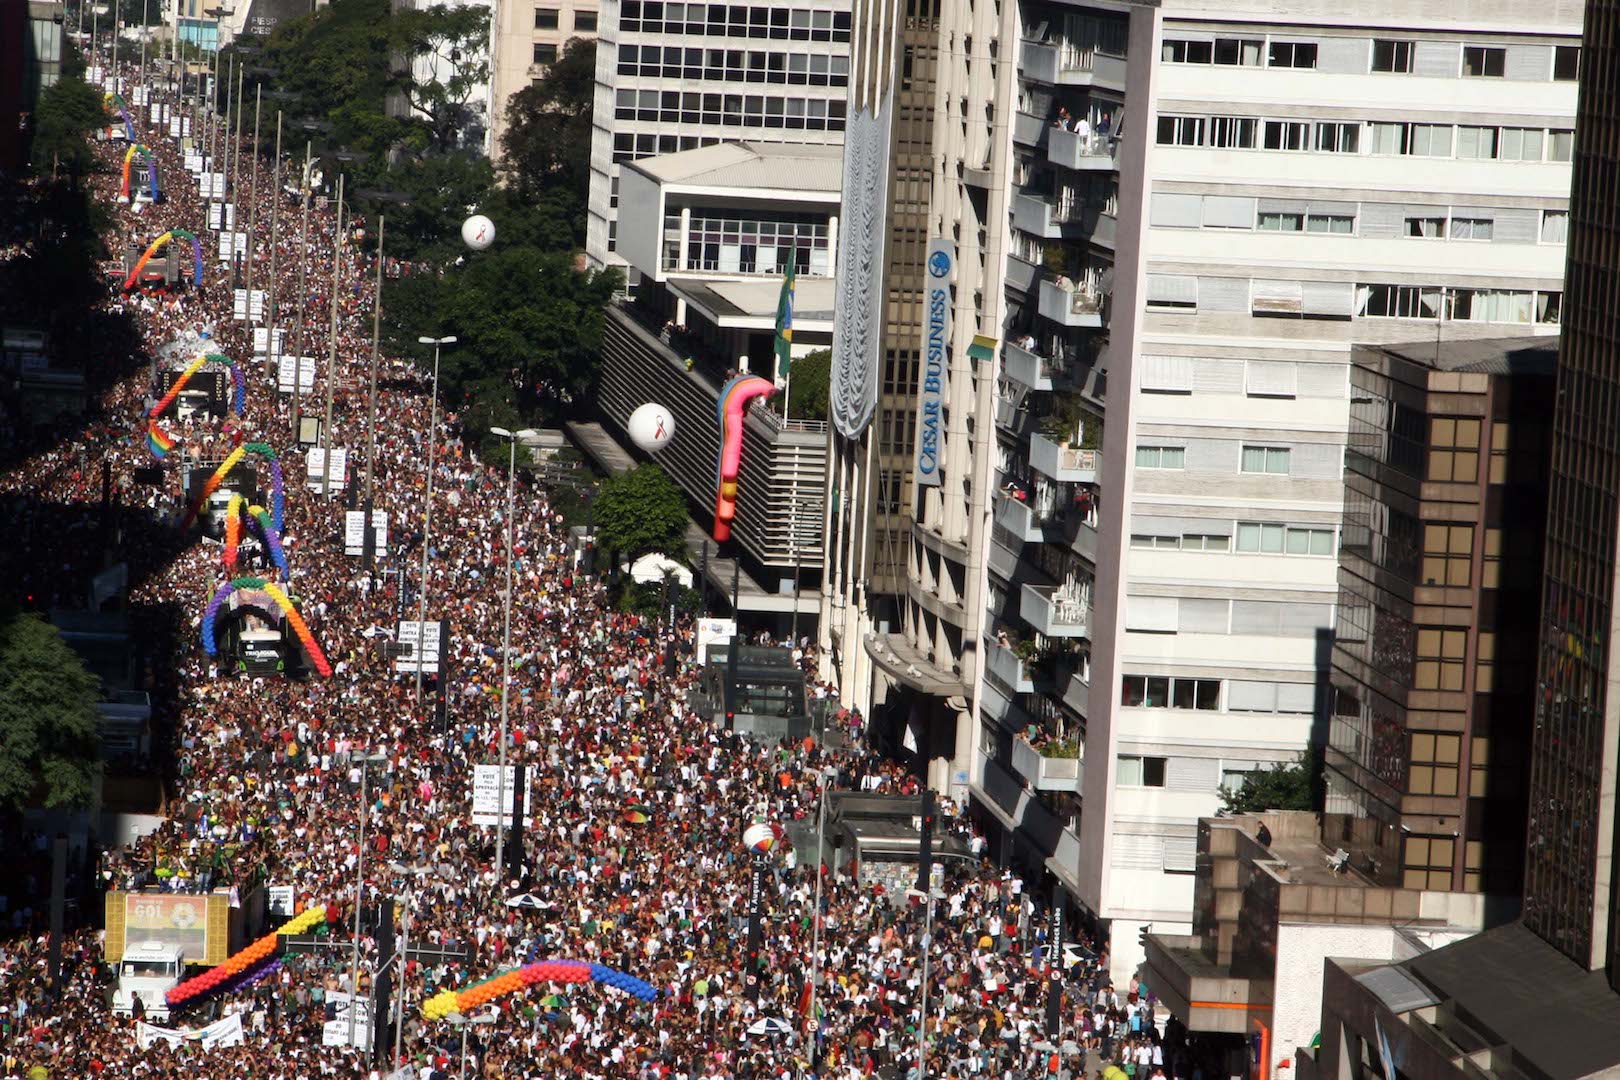 Brazil,More than three million people attended Sunday's Pride Parade in São Paulo